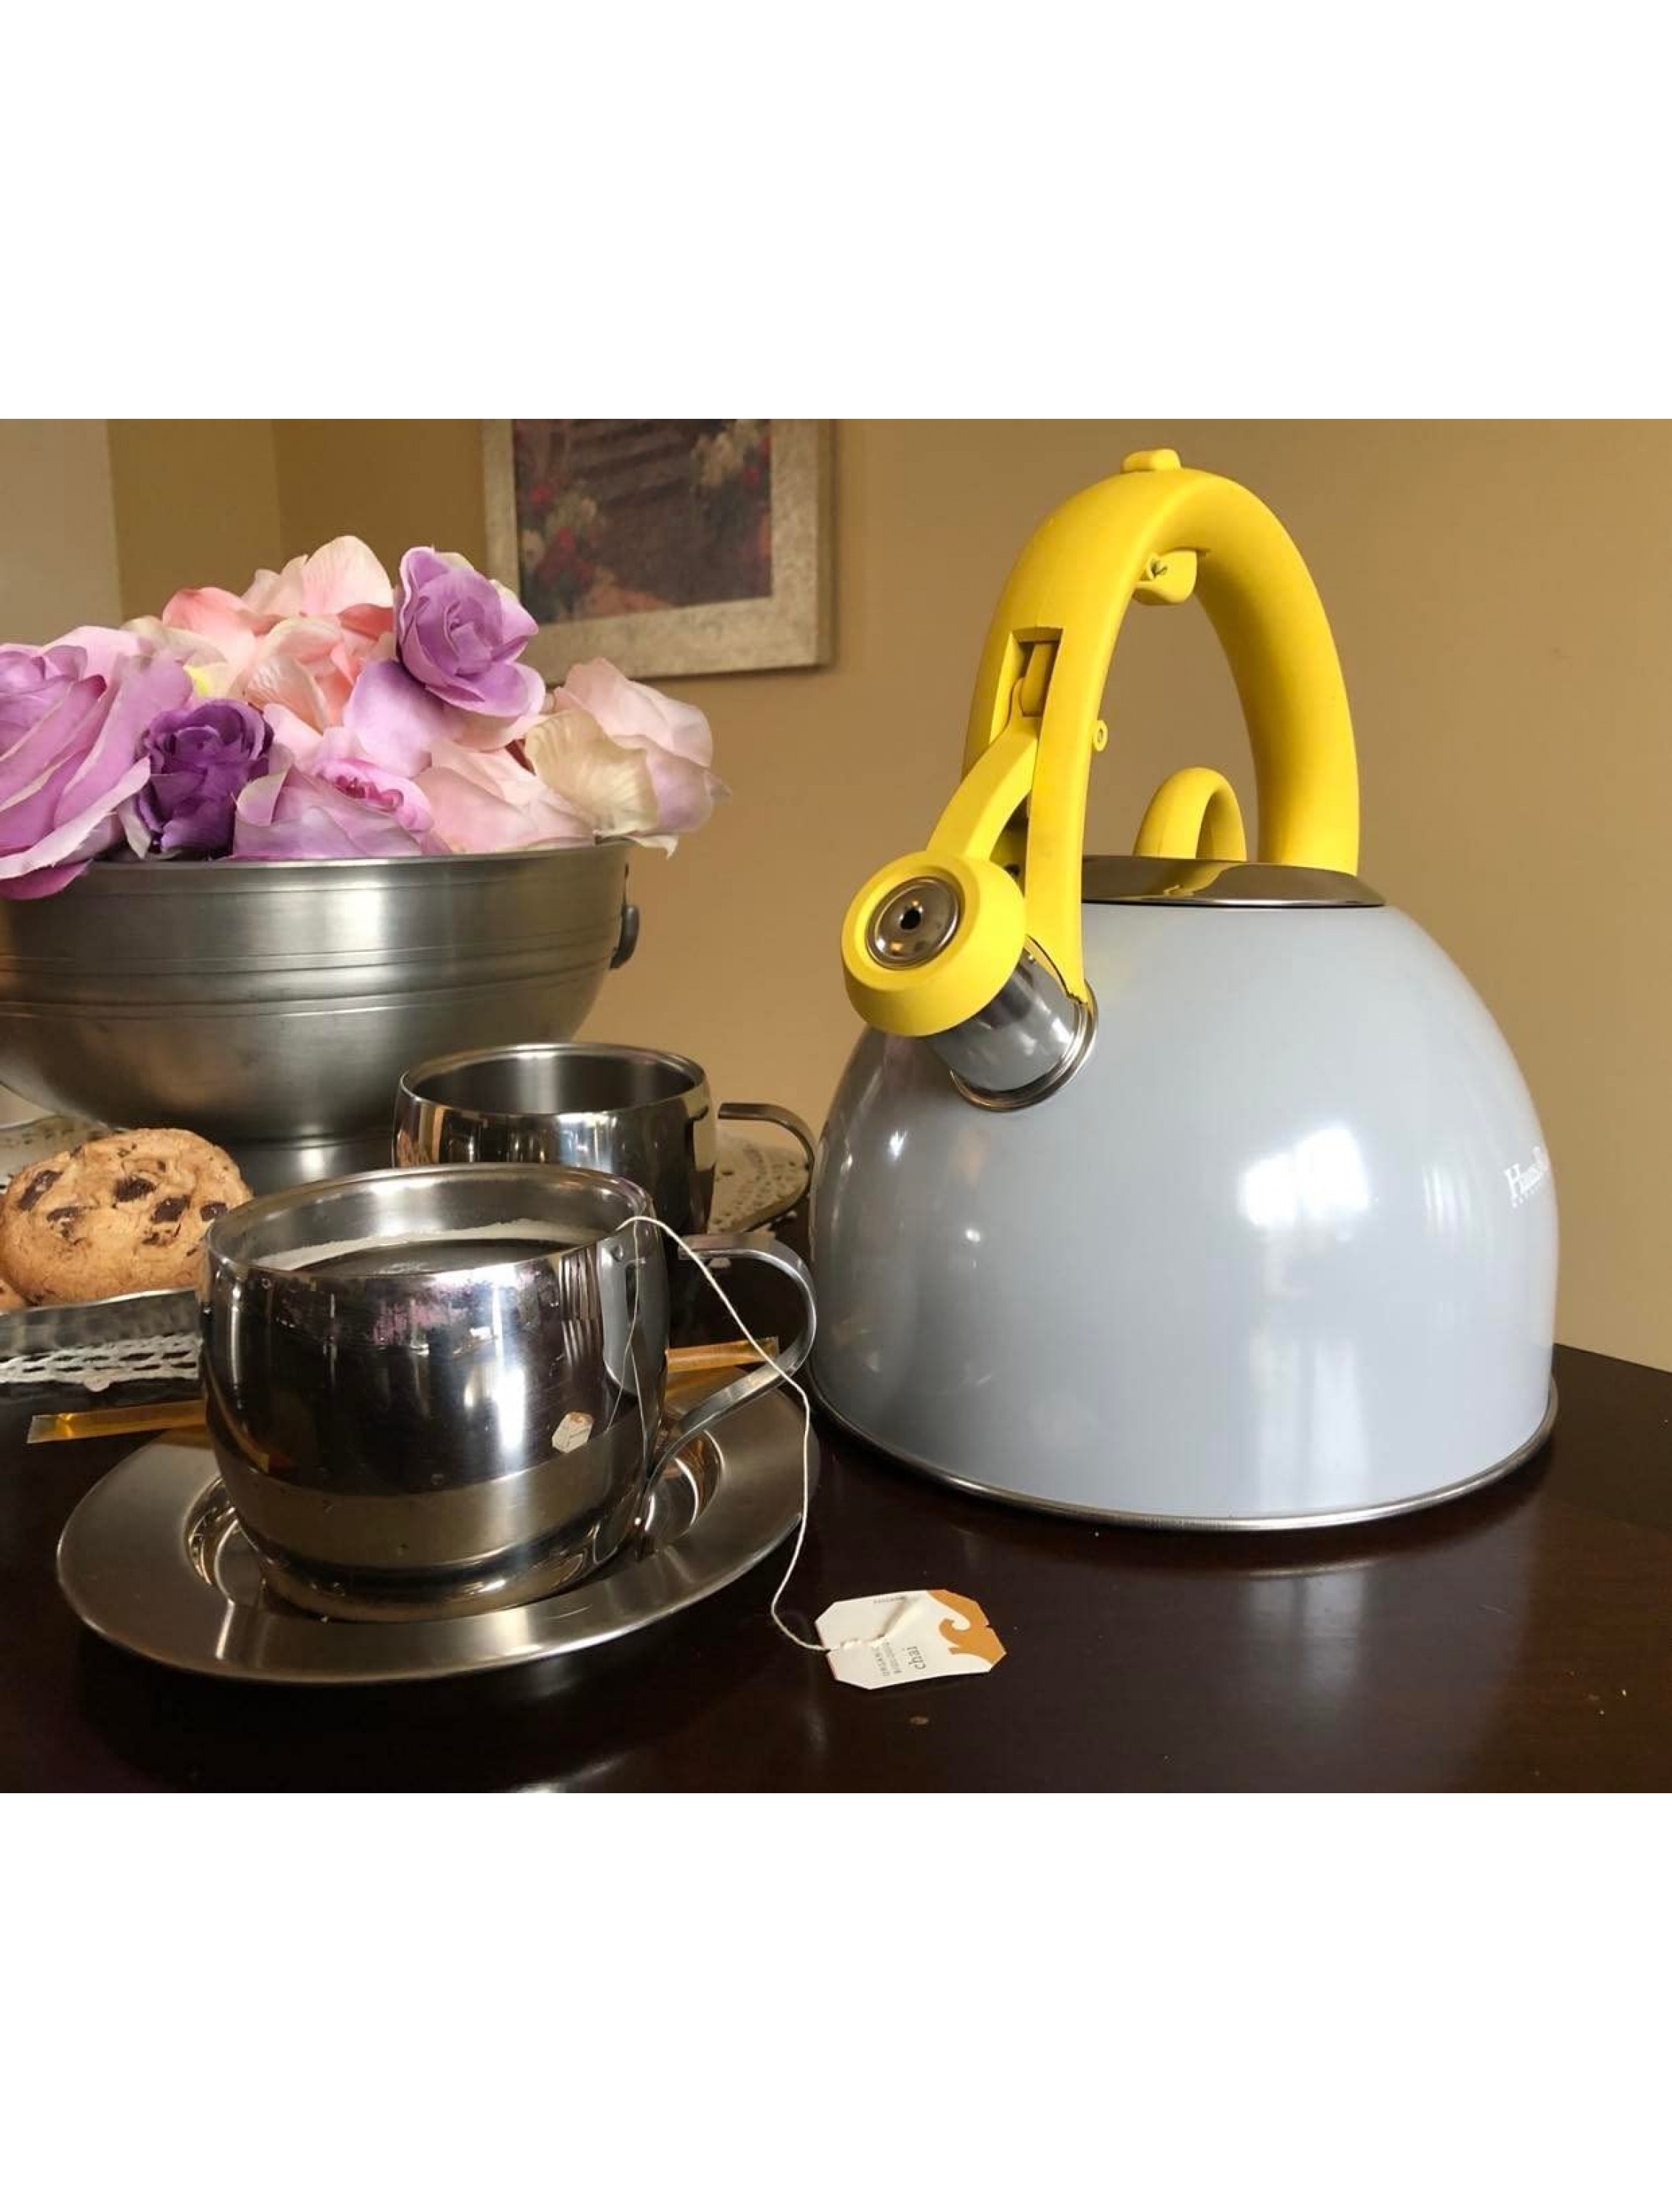 Eco- Friendly Tea Kettle for stove top 2.64 Quart Modern Grey and Yellow Food grade Stainless Steel Teapot Anti-Hot Handle Anti-Rust Shiny Finish Whistling Teapot Loud Whistle Large 2.5 Liter - BK6L2Y3G8